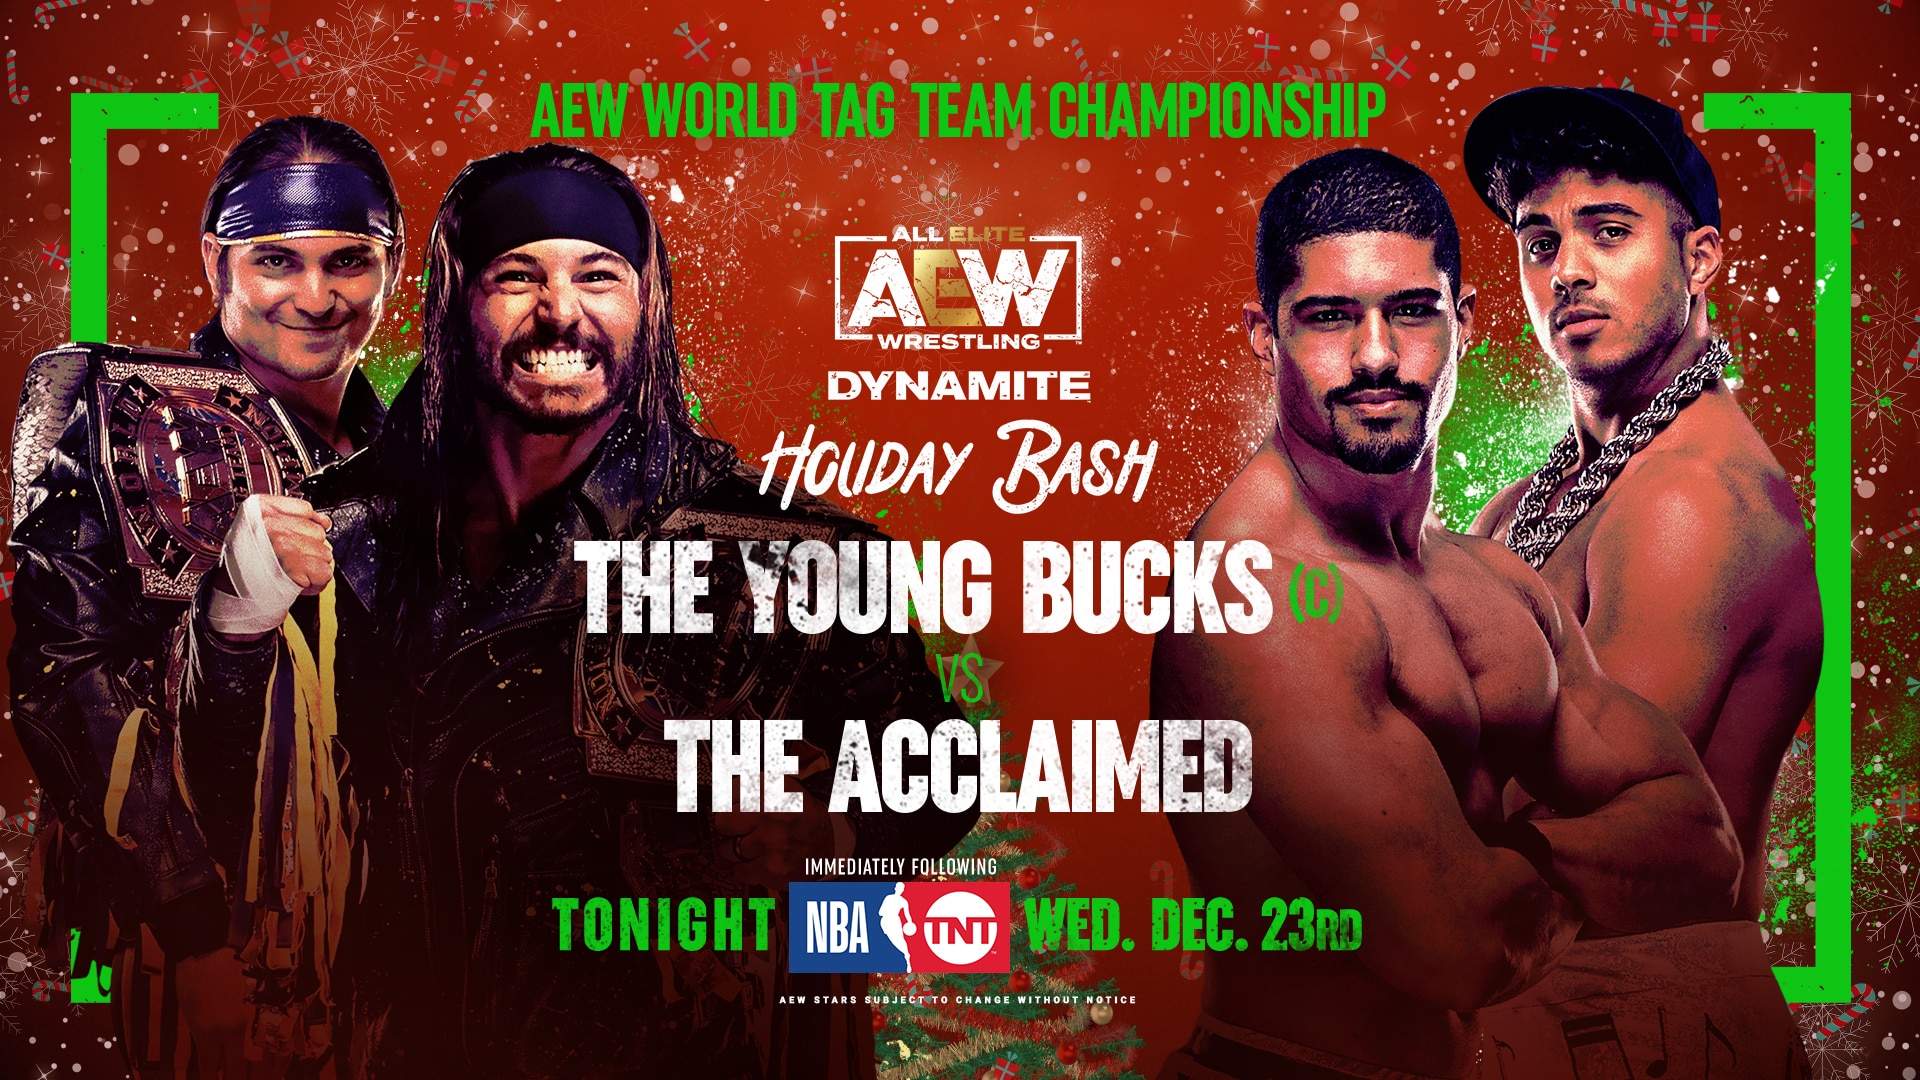 The Young Bucks vs The Acclaimed